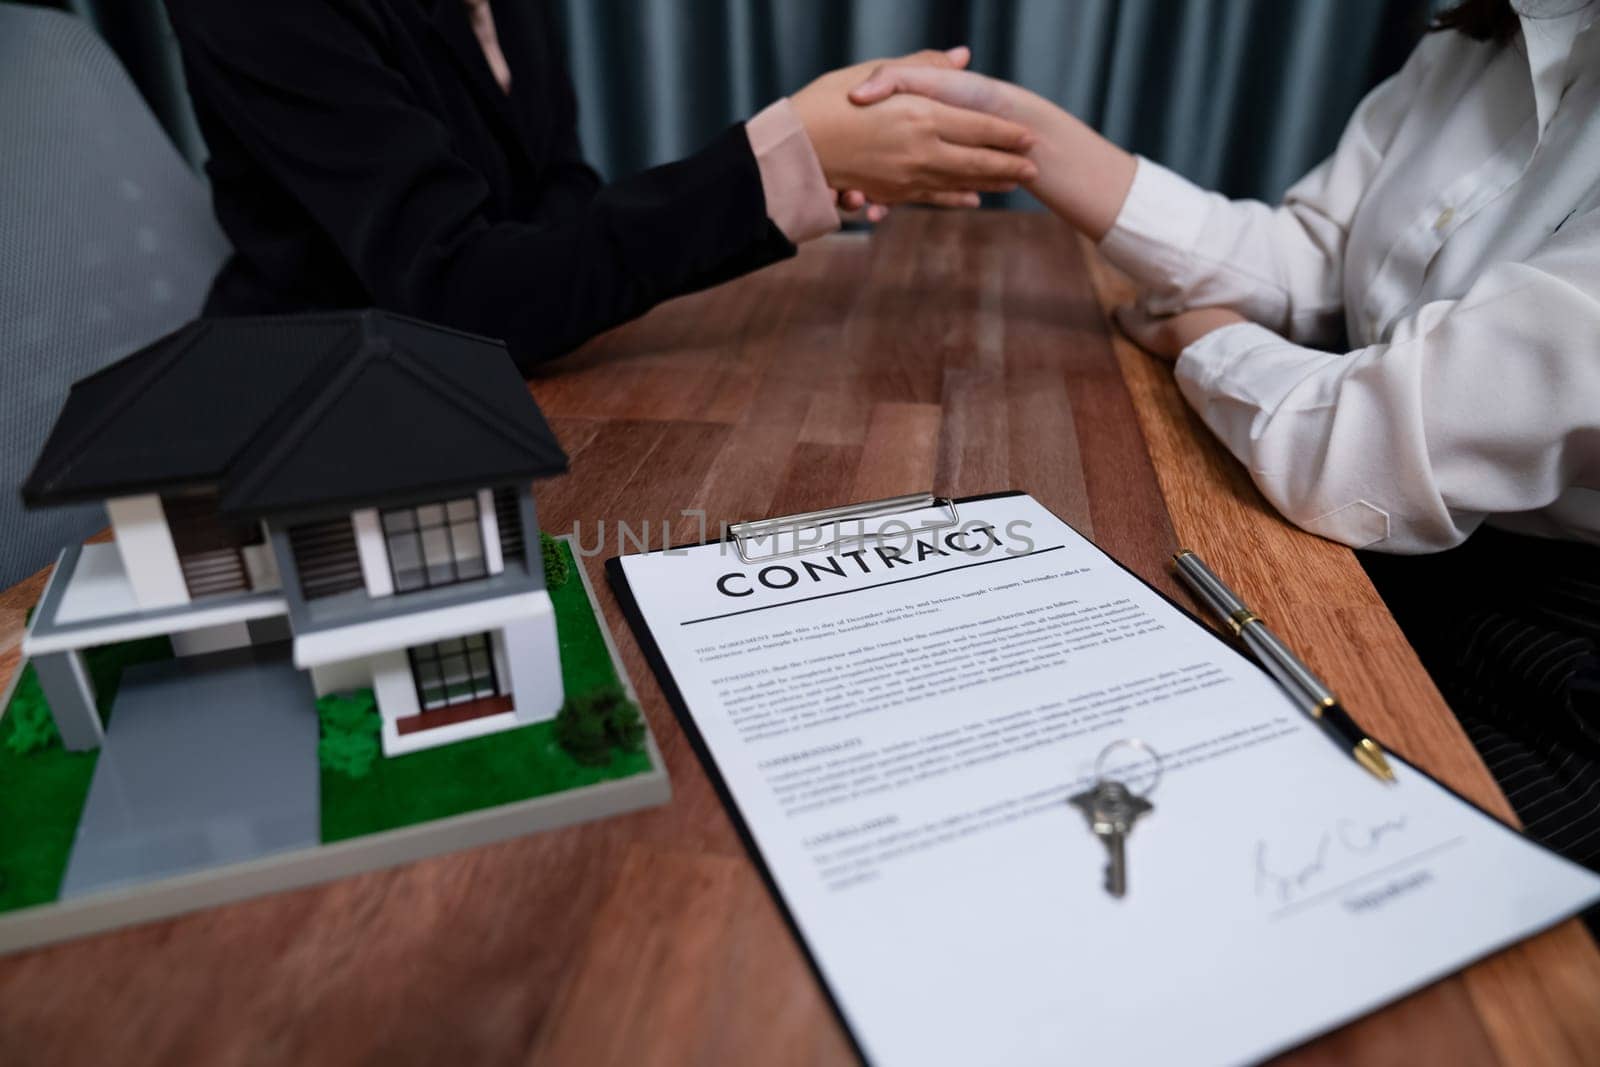 Successful house loan agreement sealed with a handshake. Buyers and agents celebrate the home ownership of property with a sense of accomplishment and satisfaction. Enthusiastic